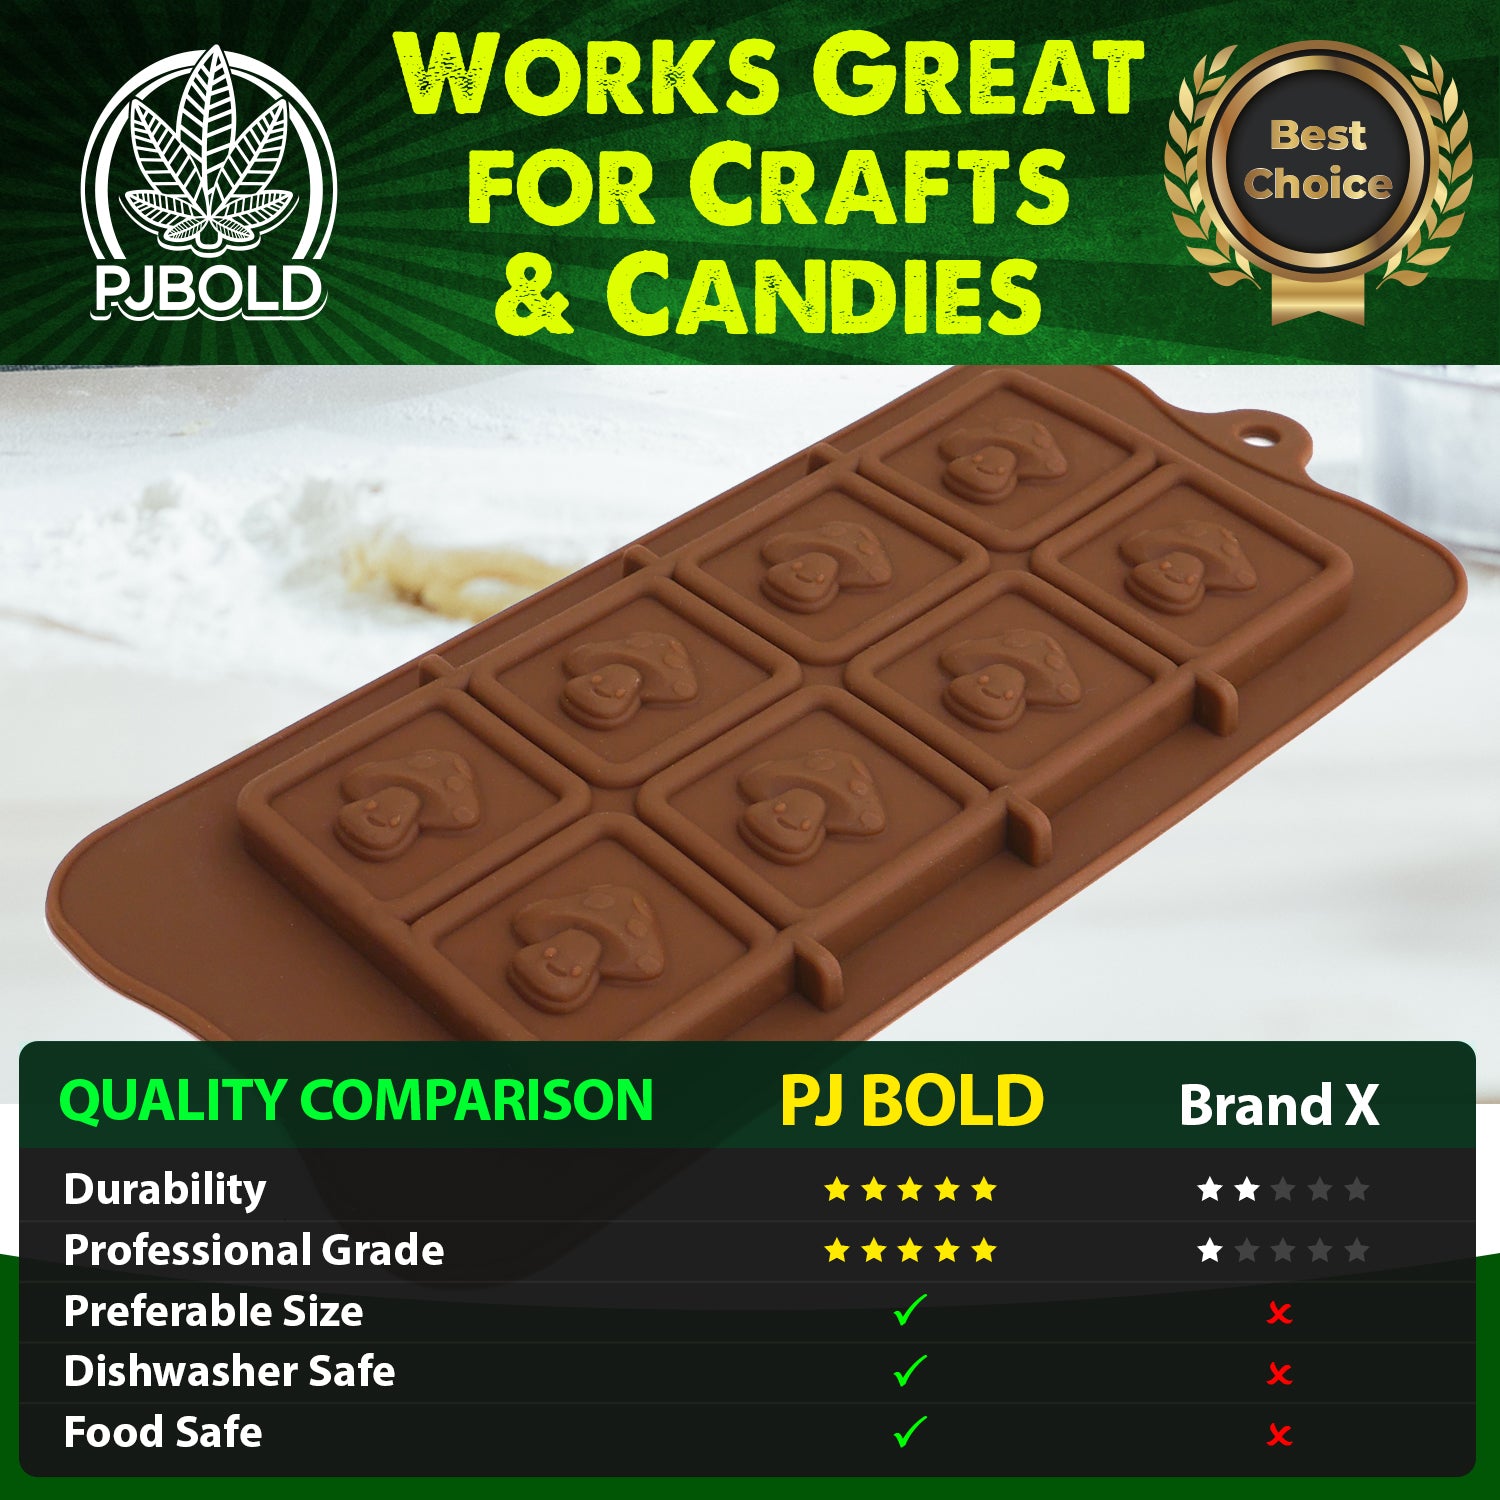 chocolate bar molds,silicone chocolate mold candy